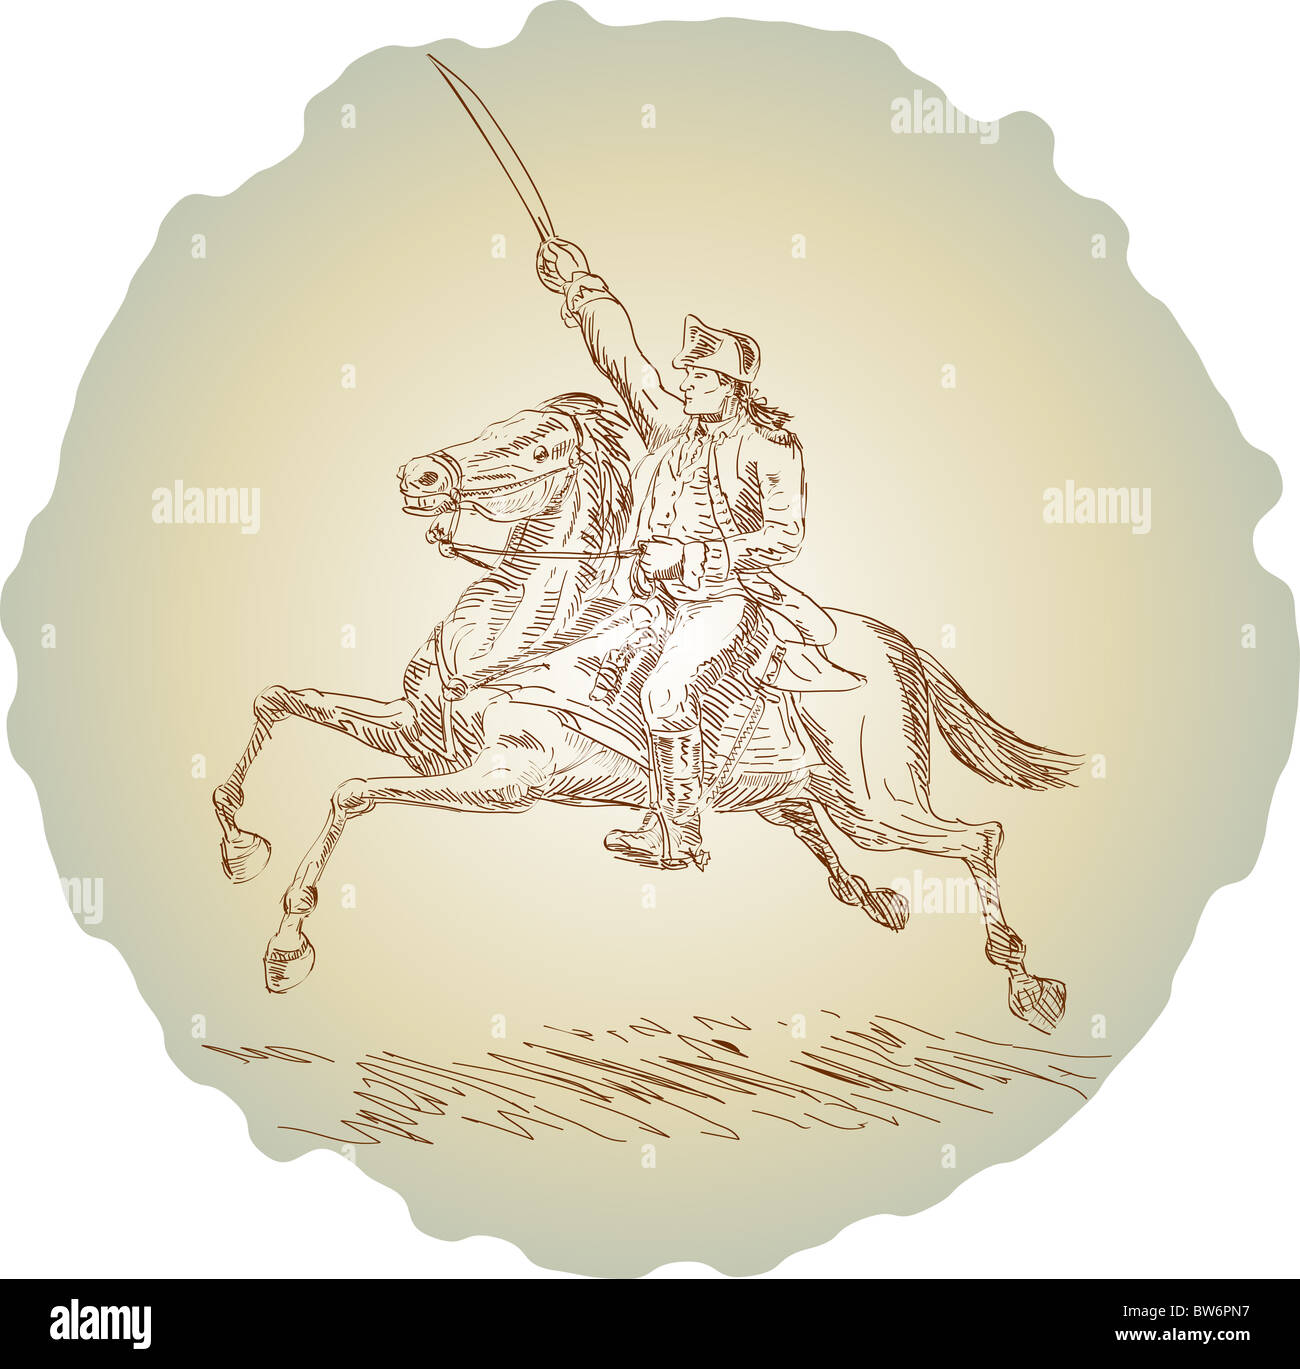 Illustration of George Washington riding horse while holding sword in the air in revolutionary war sketch on white background Stock Photo